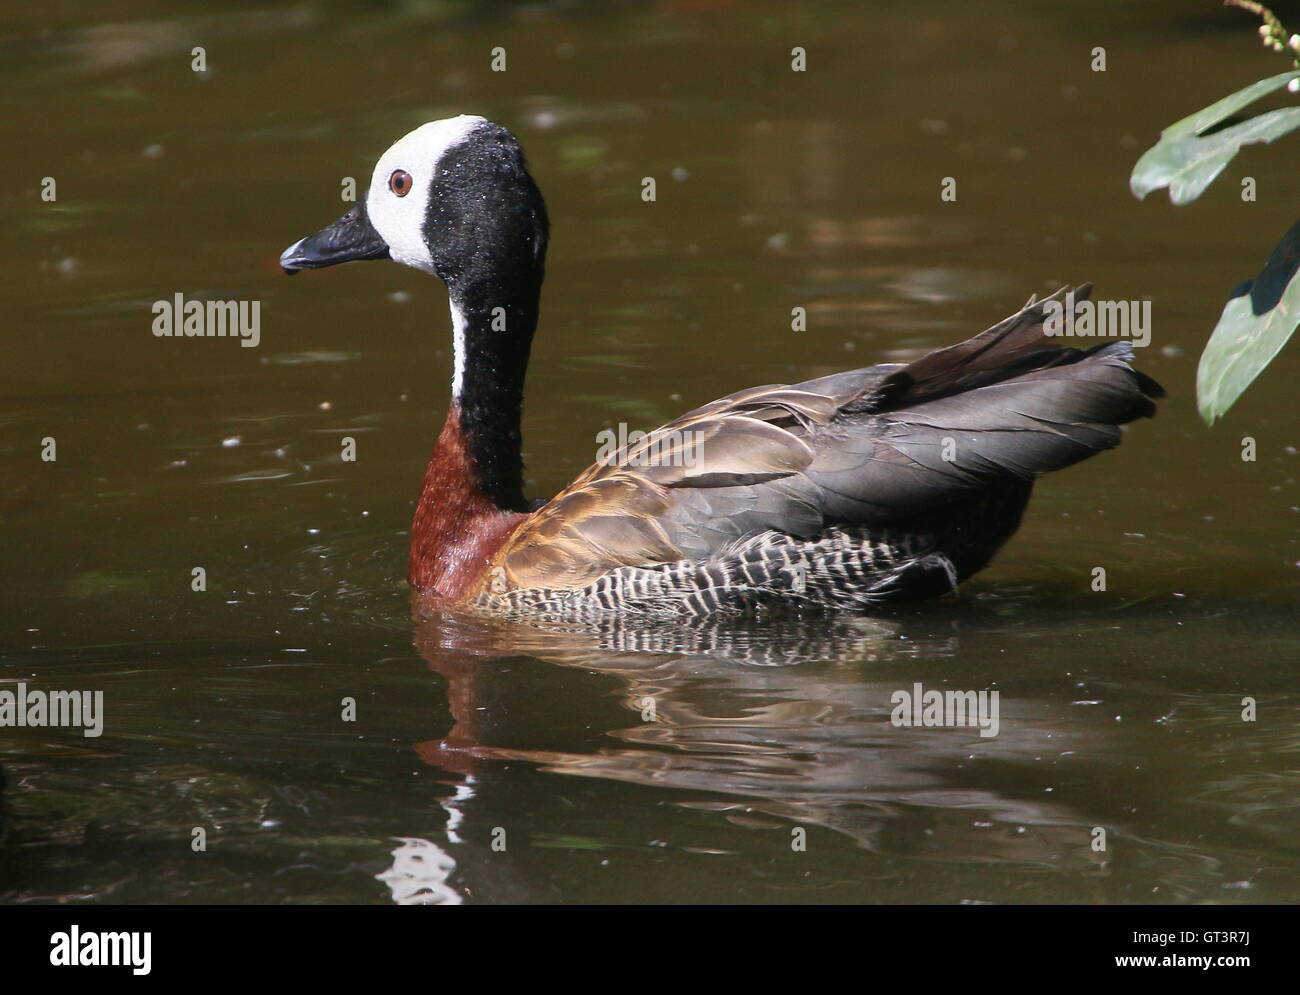 Swimming male South American White-faced whistling duck (Dendrocygna viduata), seen in profile Stock Photo